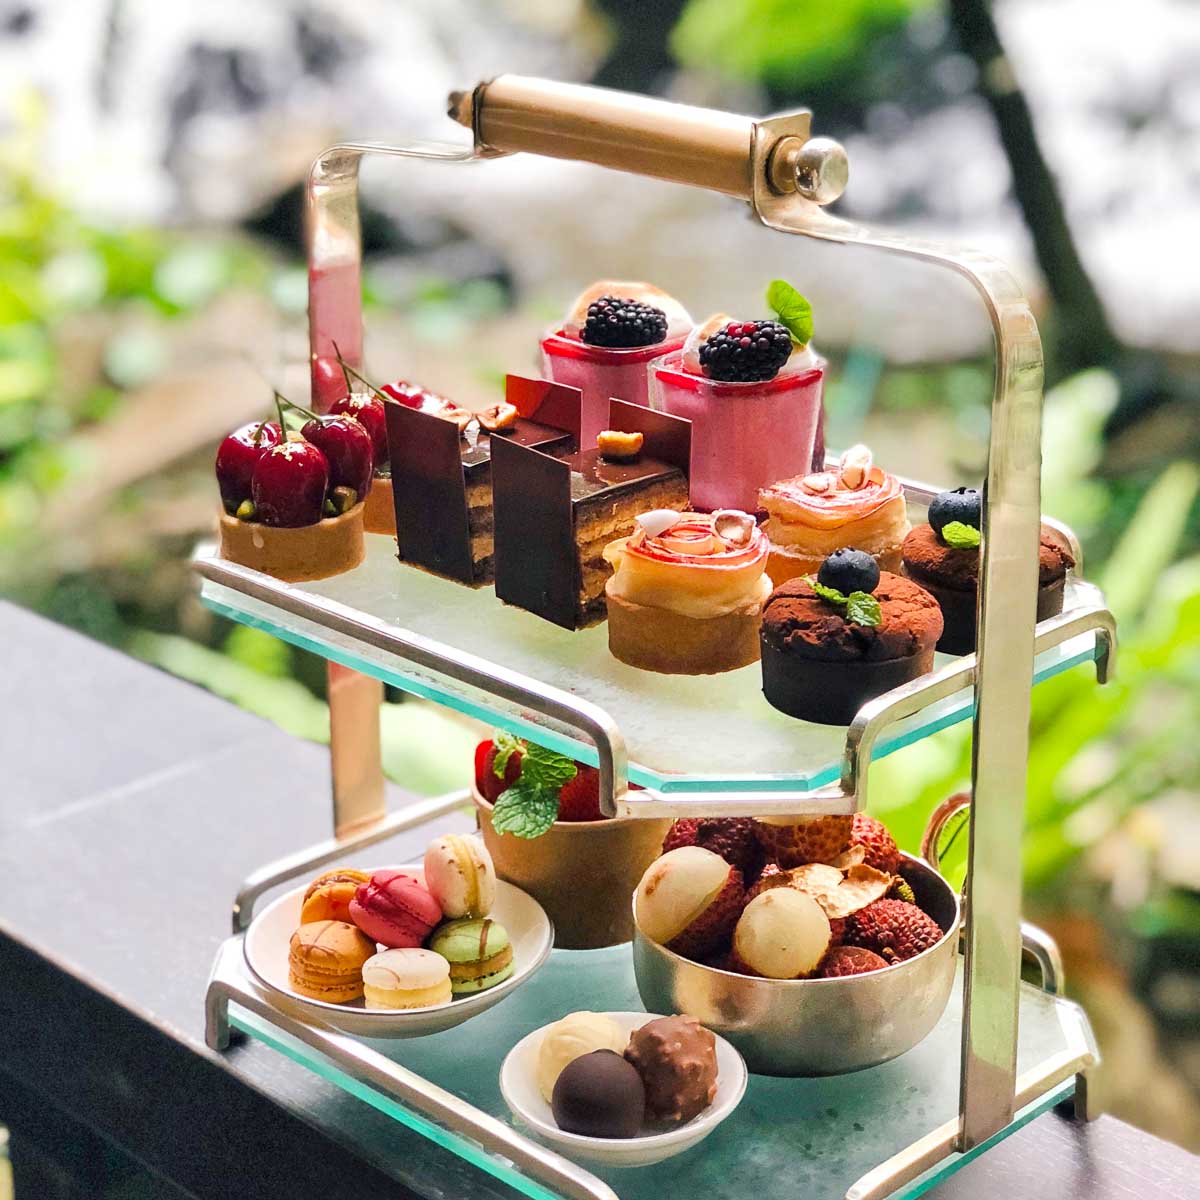 Afternoon Tea - Staycation in Singapore